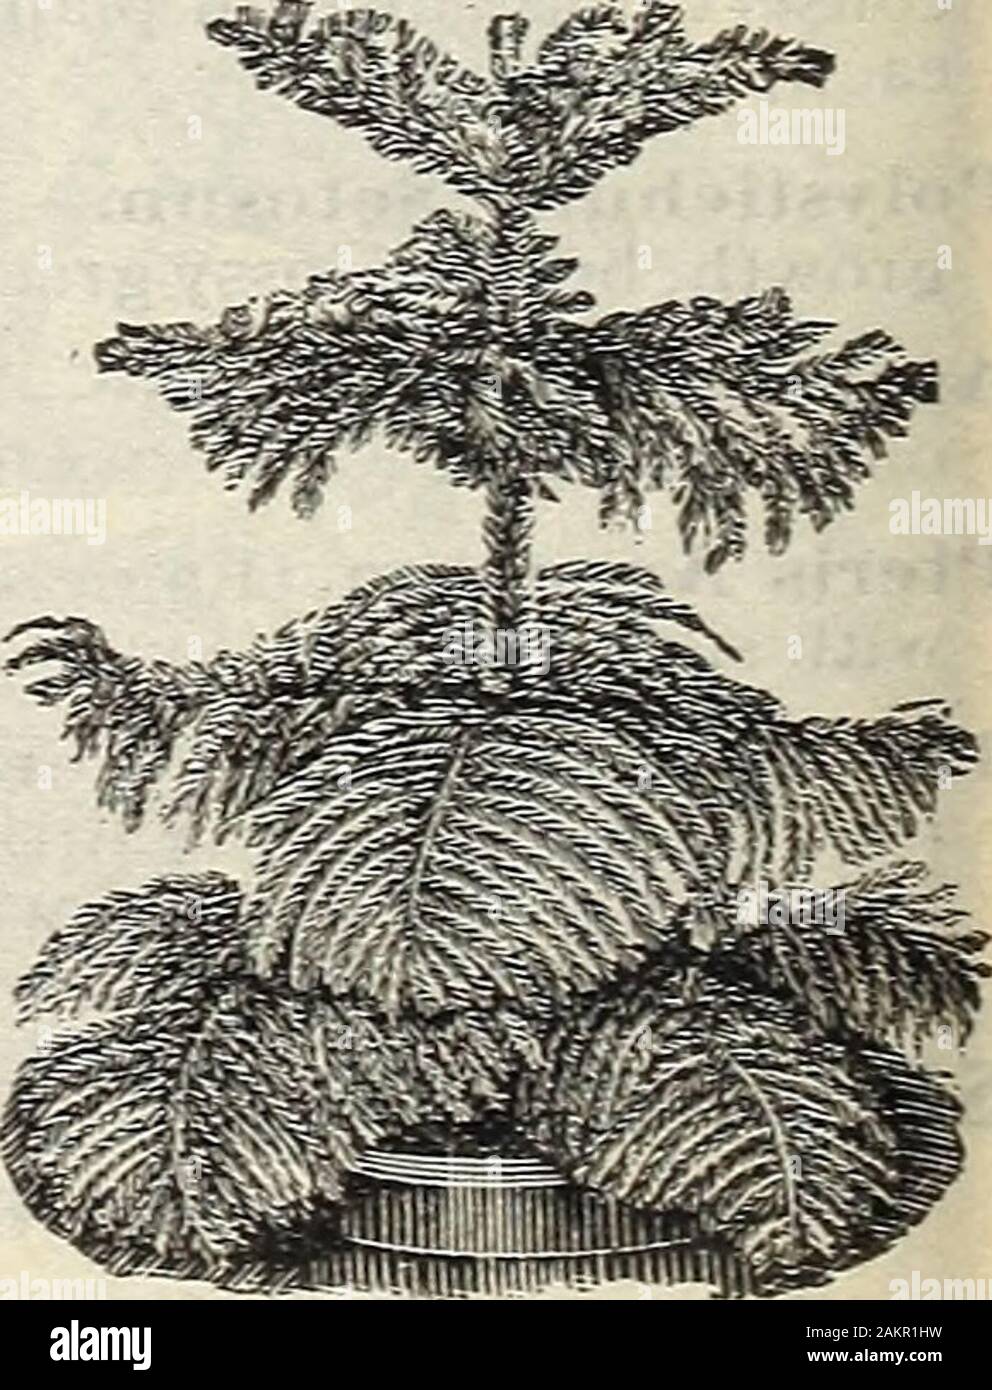 New floral guide : autumn 1906 . Christmas Tree Palm (Norfolk Island Pine; (Araucaria Excelsa) This is the handsomest and most beauti-ful of ail the decorative evergreens for houseculture. It has no equal, but is not oftenseen, because rare and expensive, but we arenow offering nice plants at the followingreasonable prices. Fine sturdy little Trees,8 to 10 inches high, 2 to 3 tiers of branches,from 4 inch pots, 75 cts. each, postpaid.Larger and heavier trees, $1.00, $L50 andS2.00 each, by express.. ARAUCARIA EXCELSA UMBRELLA PLANT, CYPERUSALTERNIFOLIA SPECIAL OFFER.The 4 Palms and Cyperus Alte Stock Photo